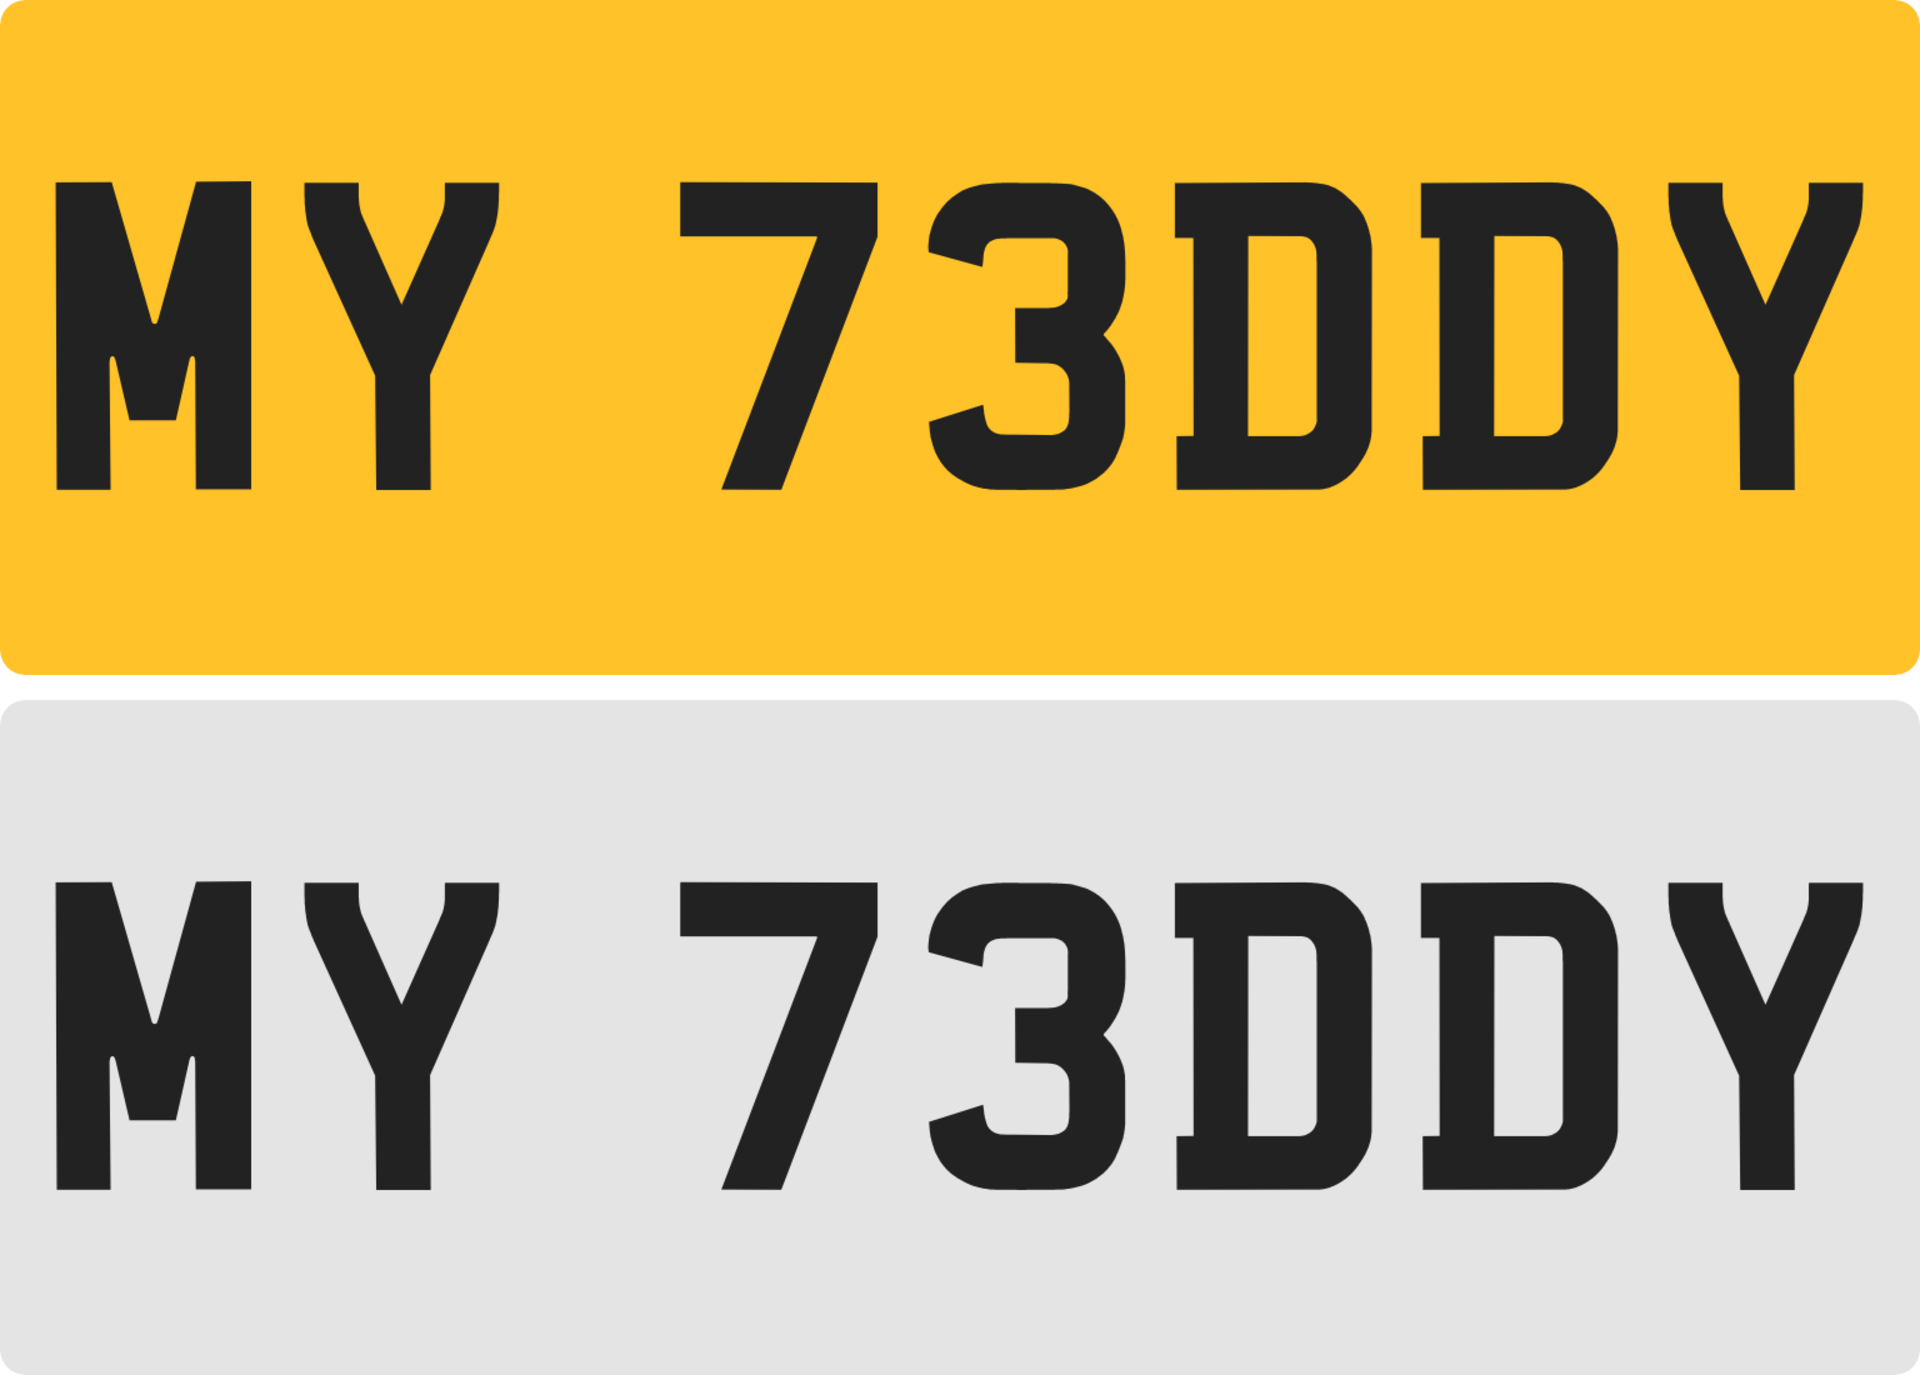 MY 73DDY - CHERISHED PRIVATE VEHICLE REGISTRATION CAR PLATE - (My Teddy / Edward) - Image 2 of 2